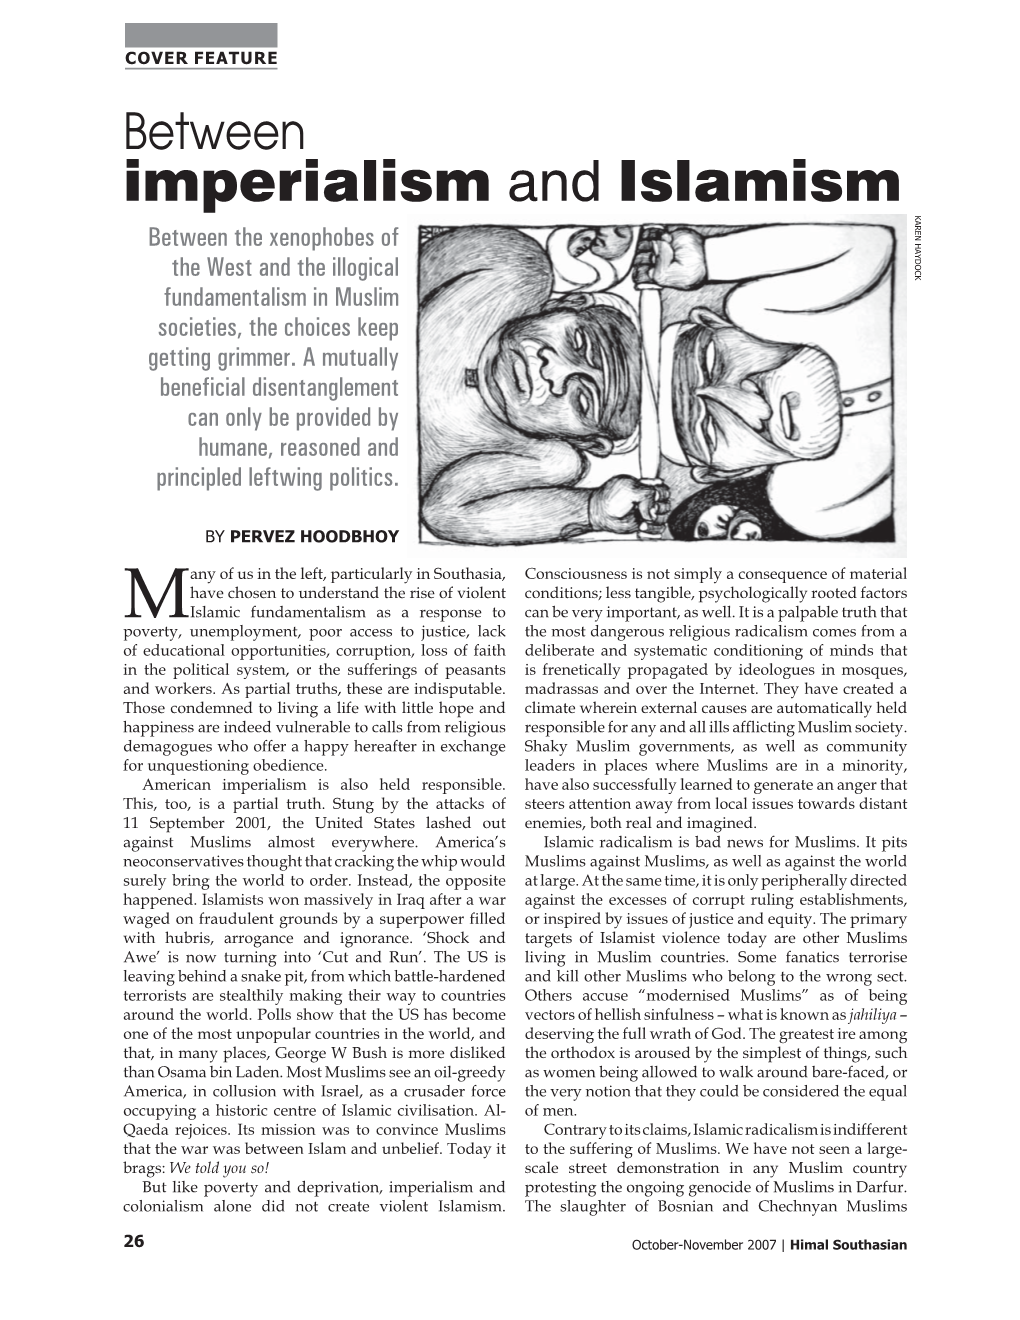 Between Imperialism and Islamism